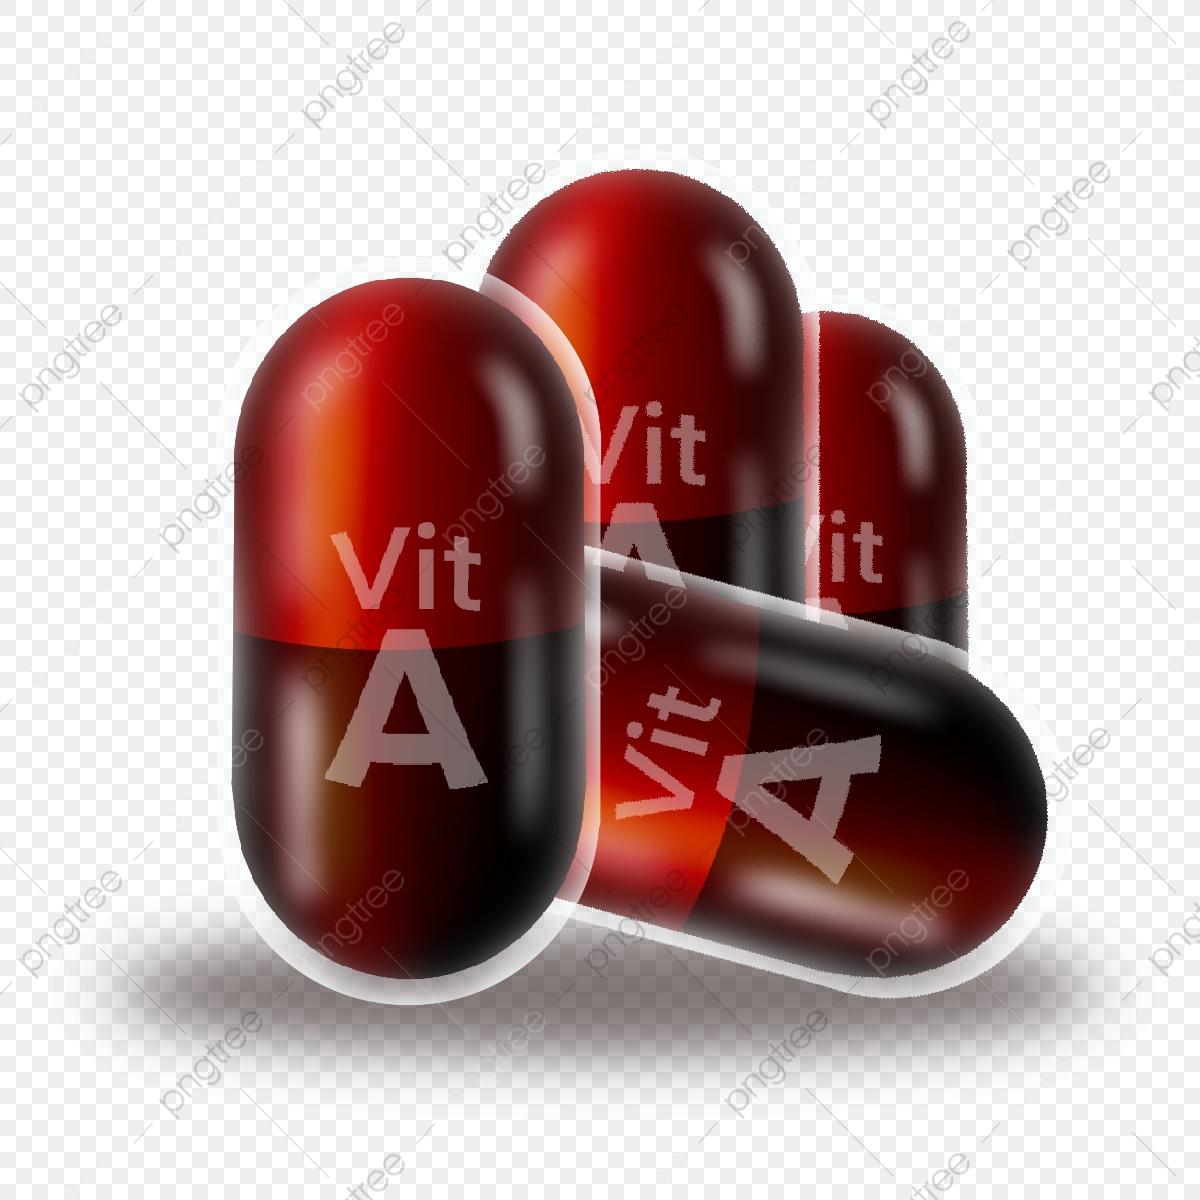 ~/Root_Storage/AR/EB_List_Page/pngtree-illustration-of-vitamin-a-capsule-png-image_5343926.jpg